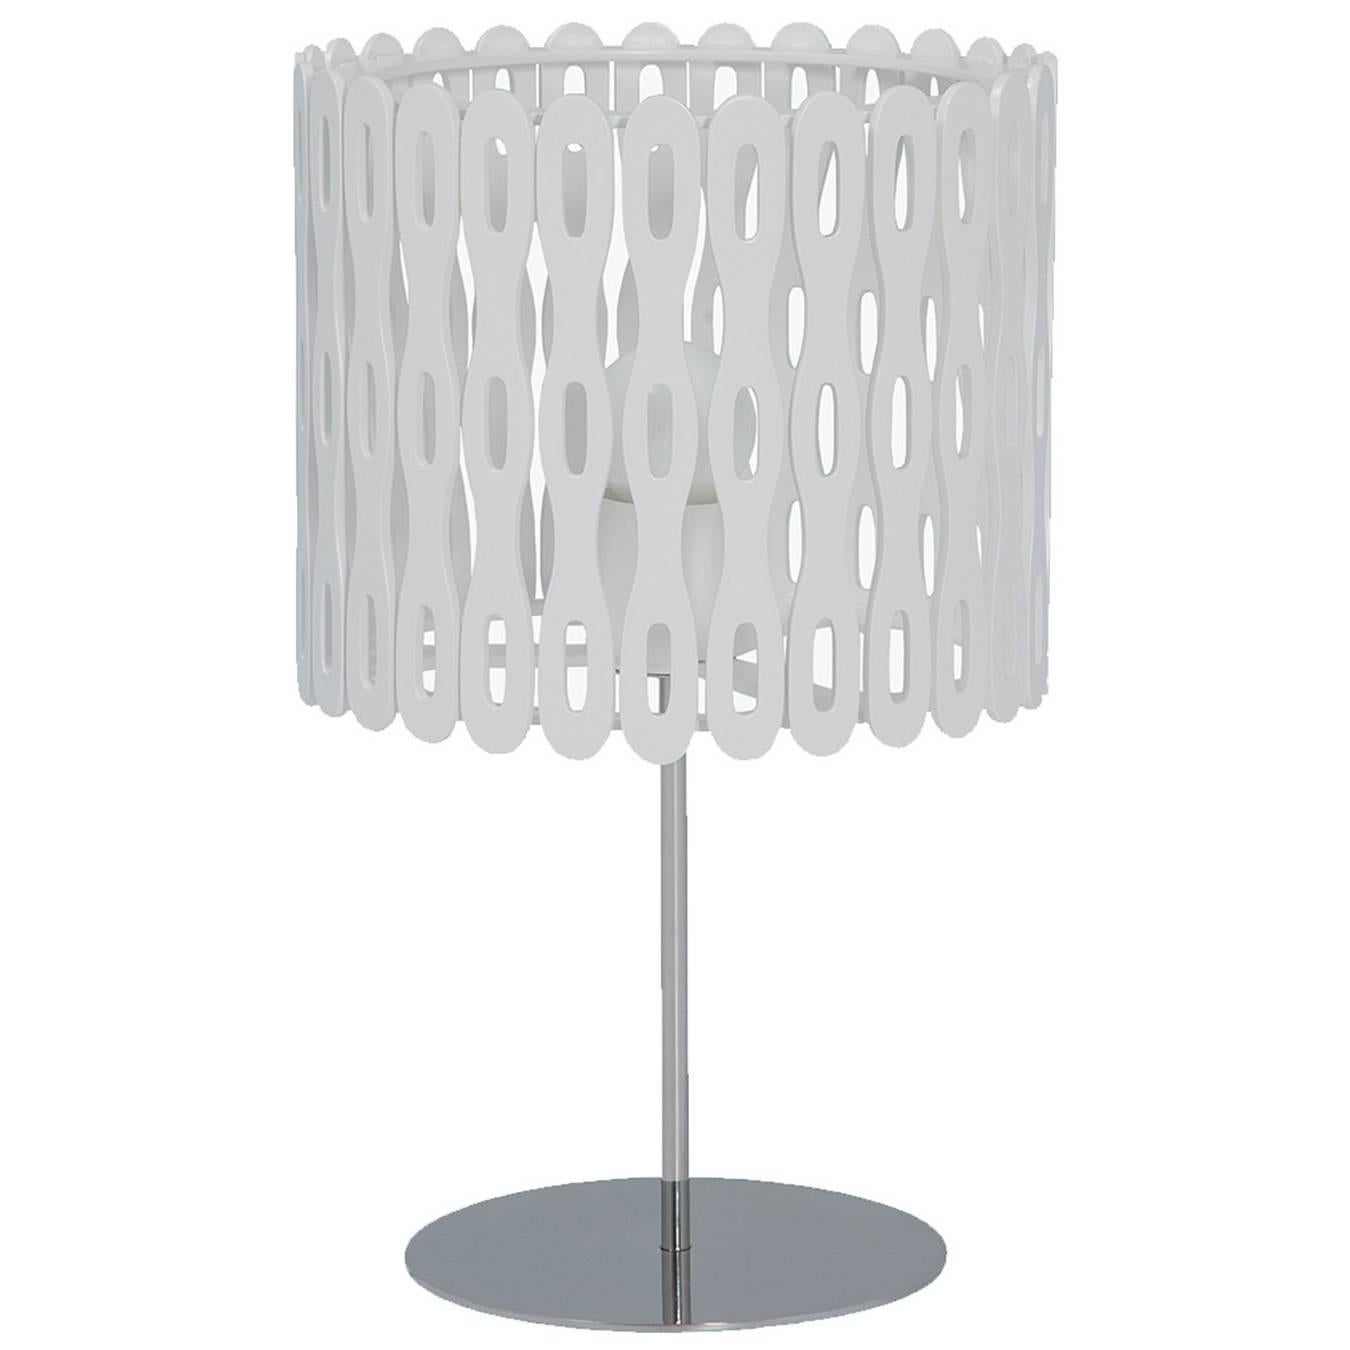 Arpoador Brazilian Contemporary Graphic Pattern Cut Wood Table Lamp by Lattoog